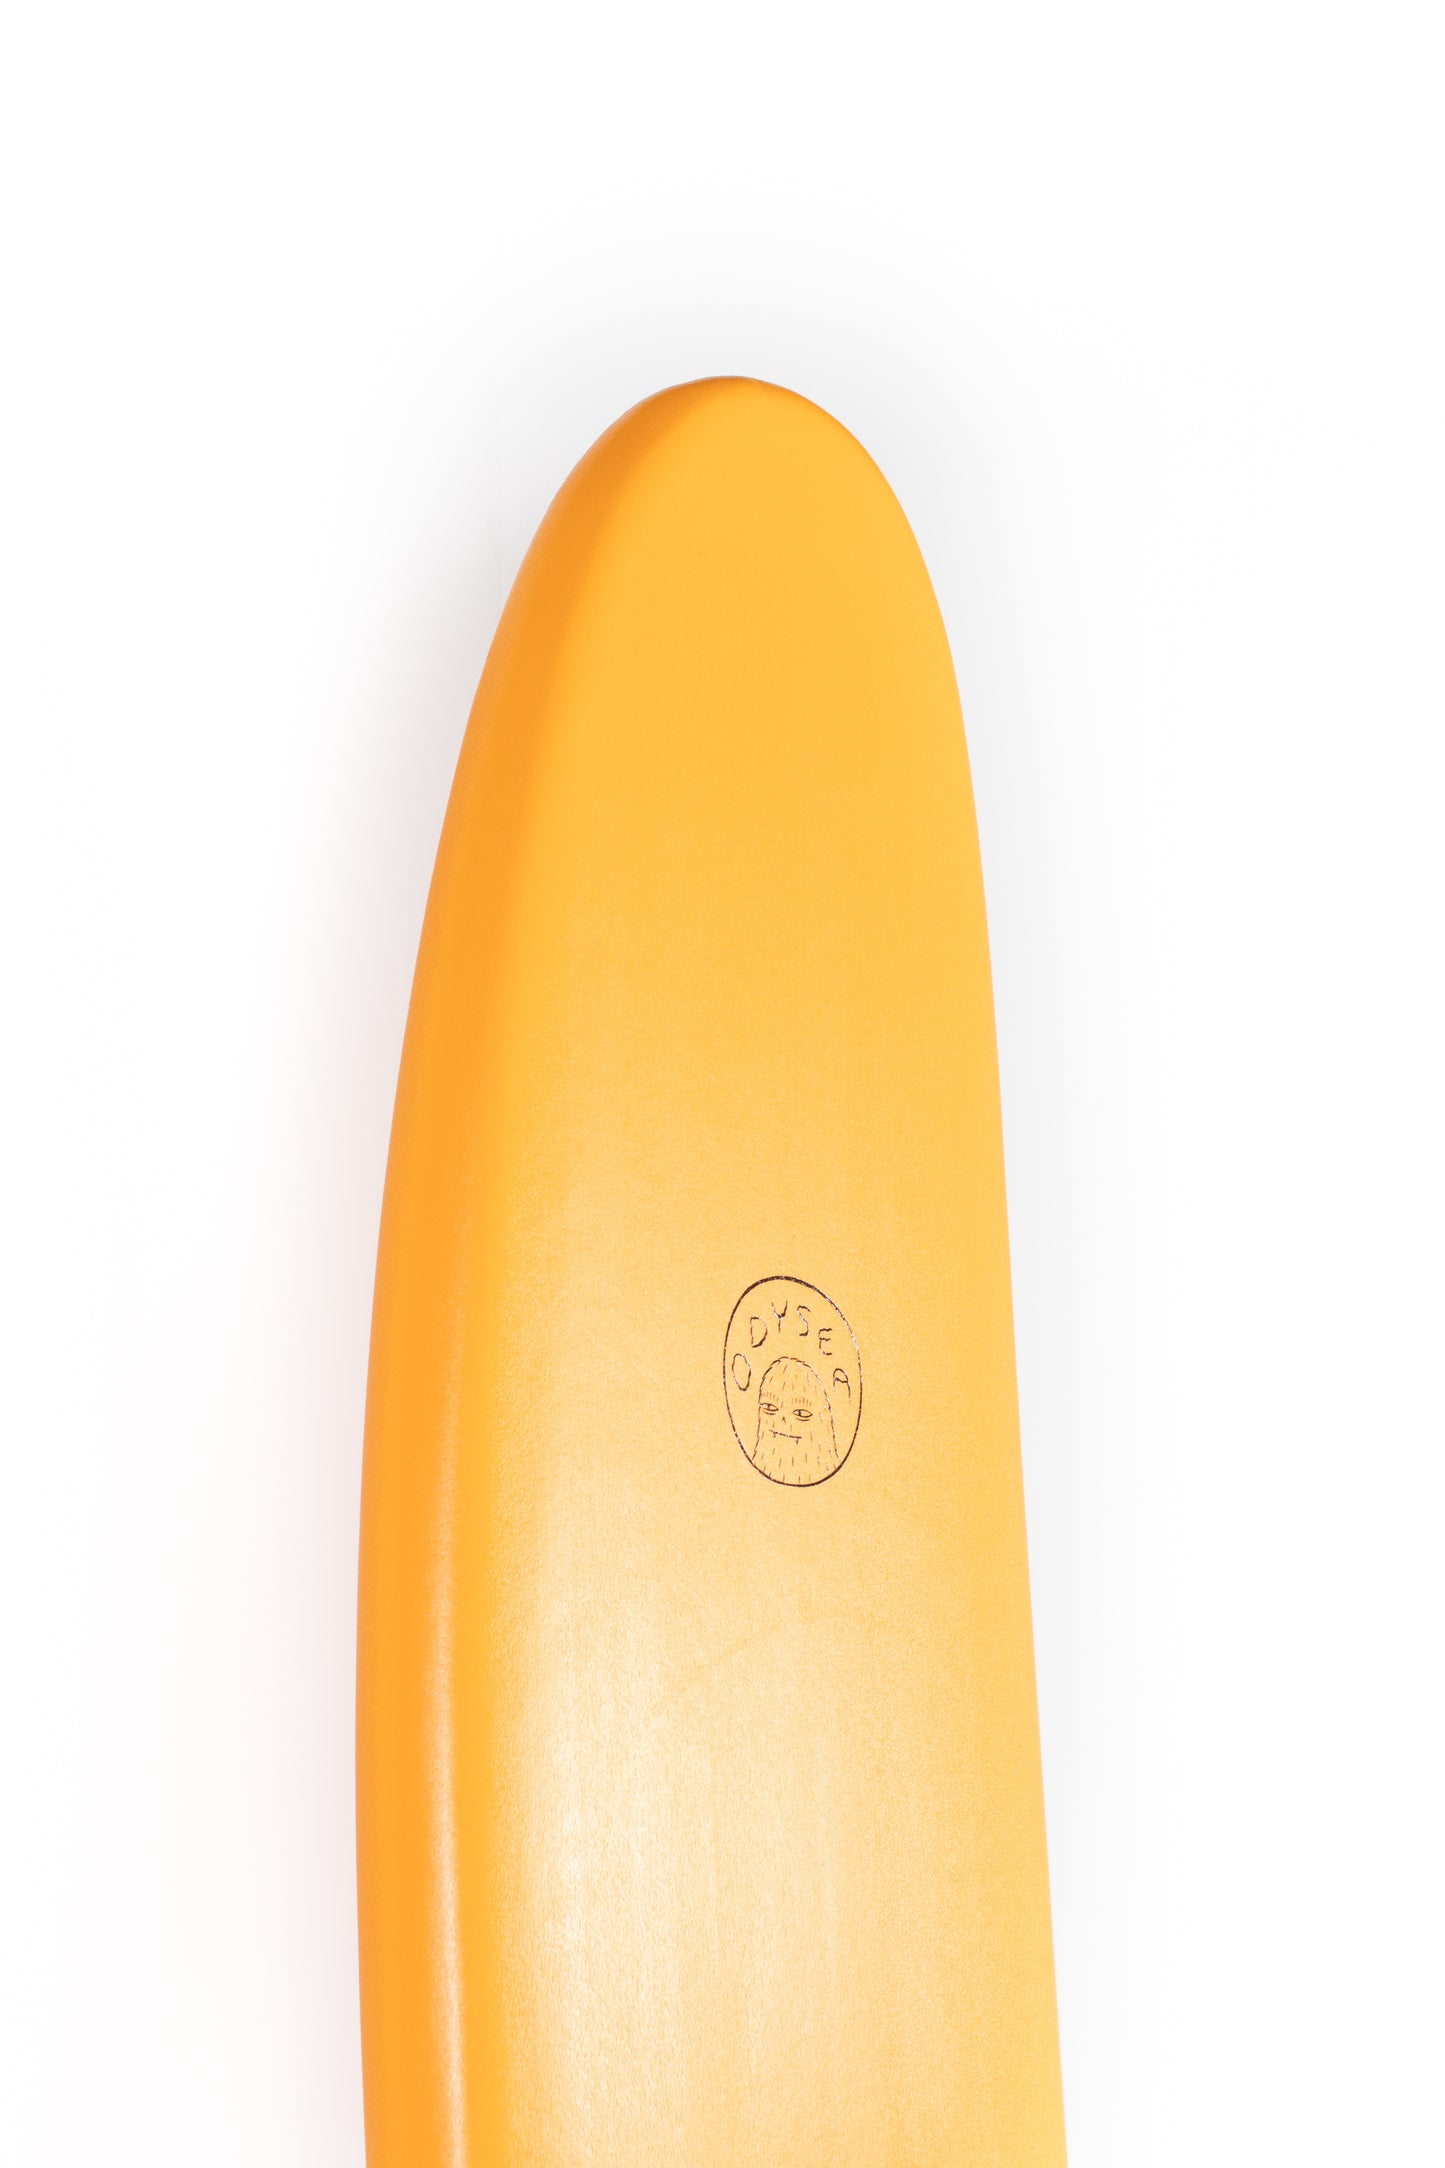 
                  
                    Pukas-Surf-Shop-Catch-Surfboards-Plank-x-Evan-Rosell-8_0
                  
                